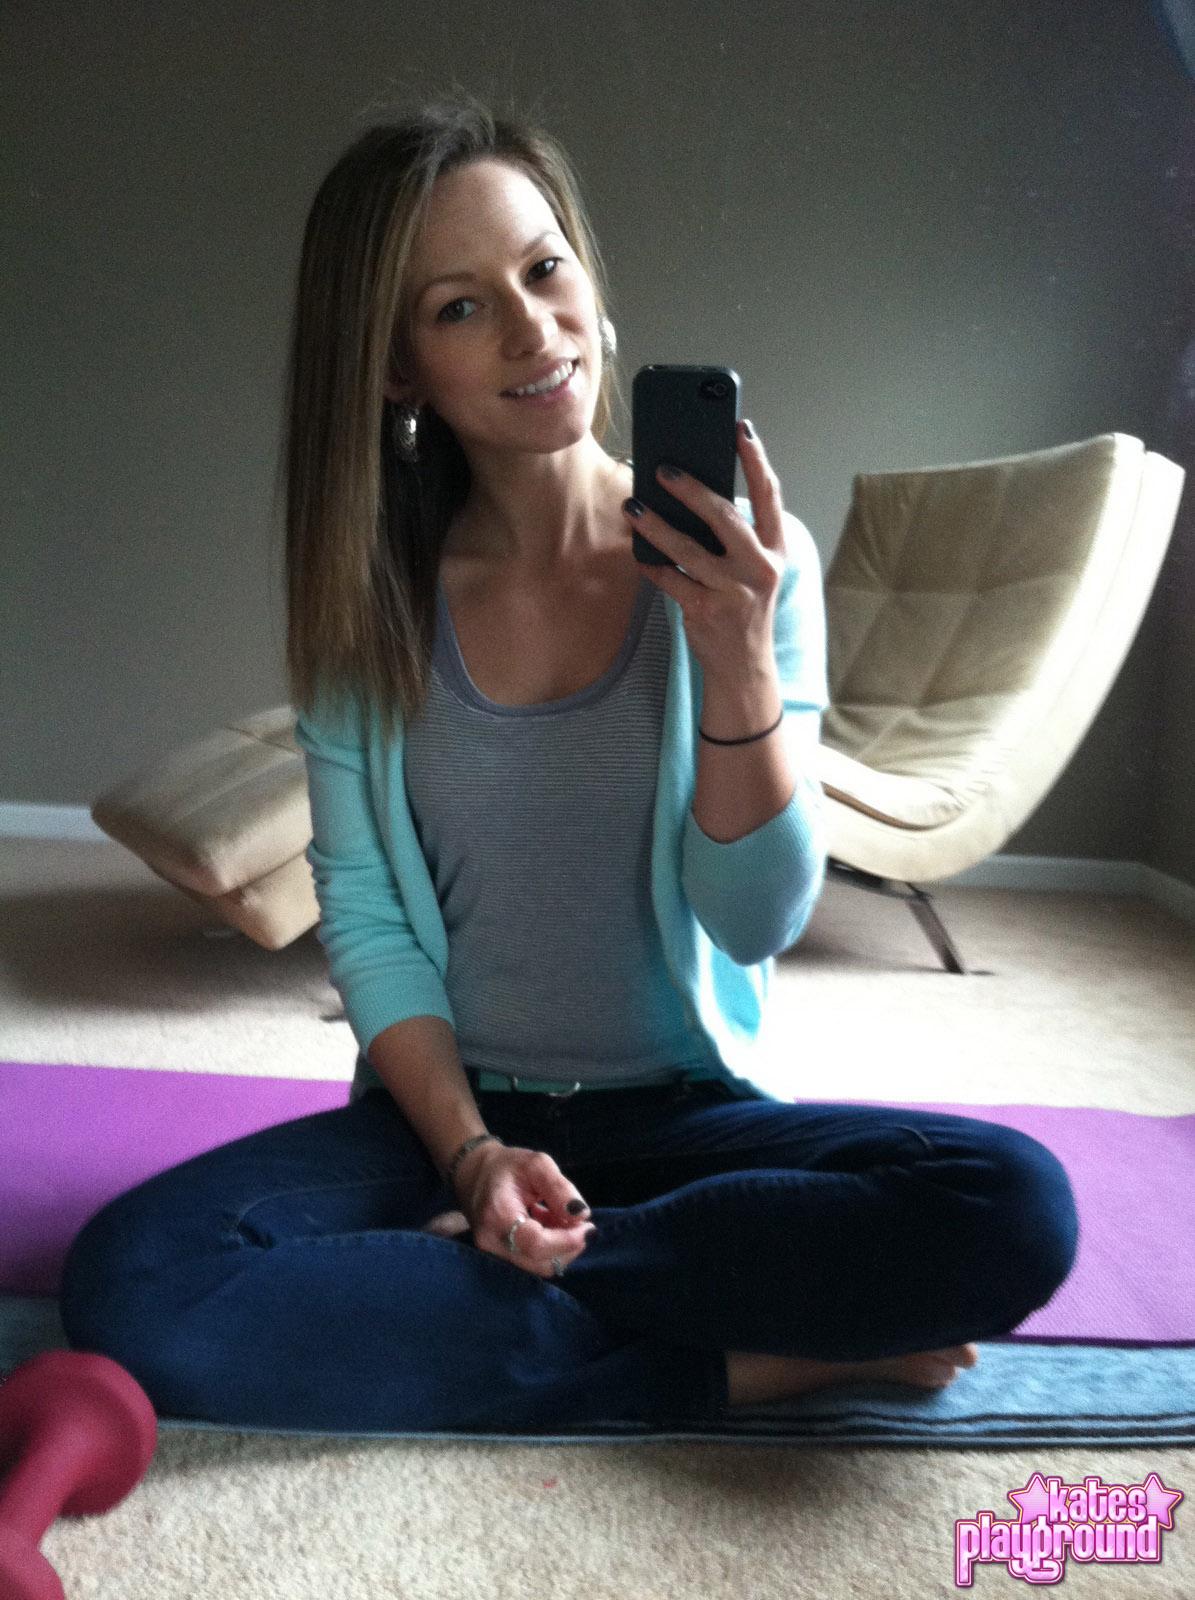 Kate feels a bit naughty at home and takes pics of herself in hot yoga pants #58060063